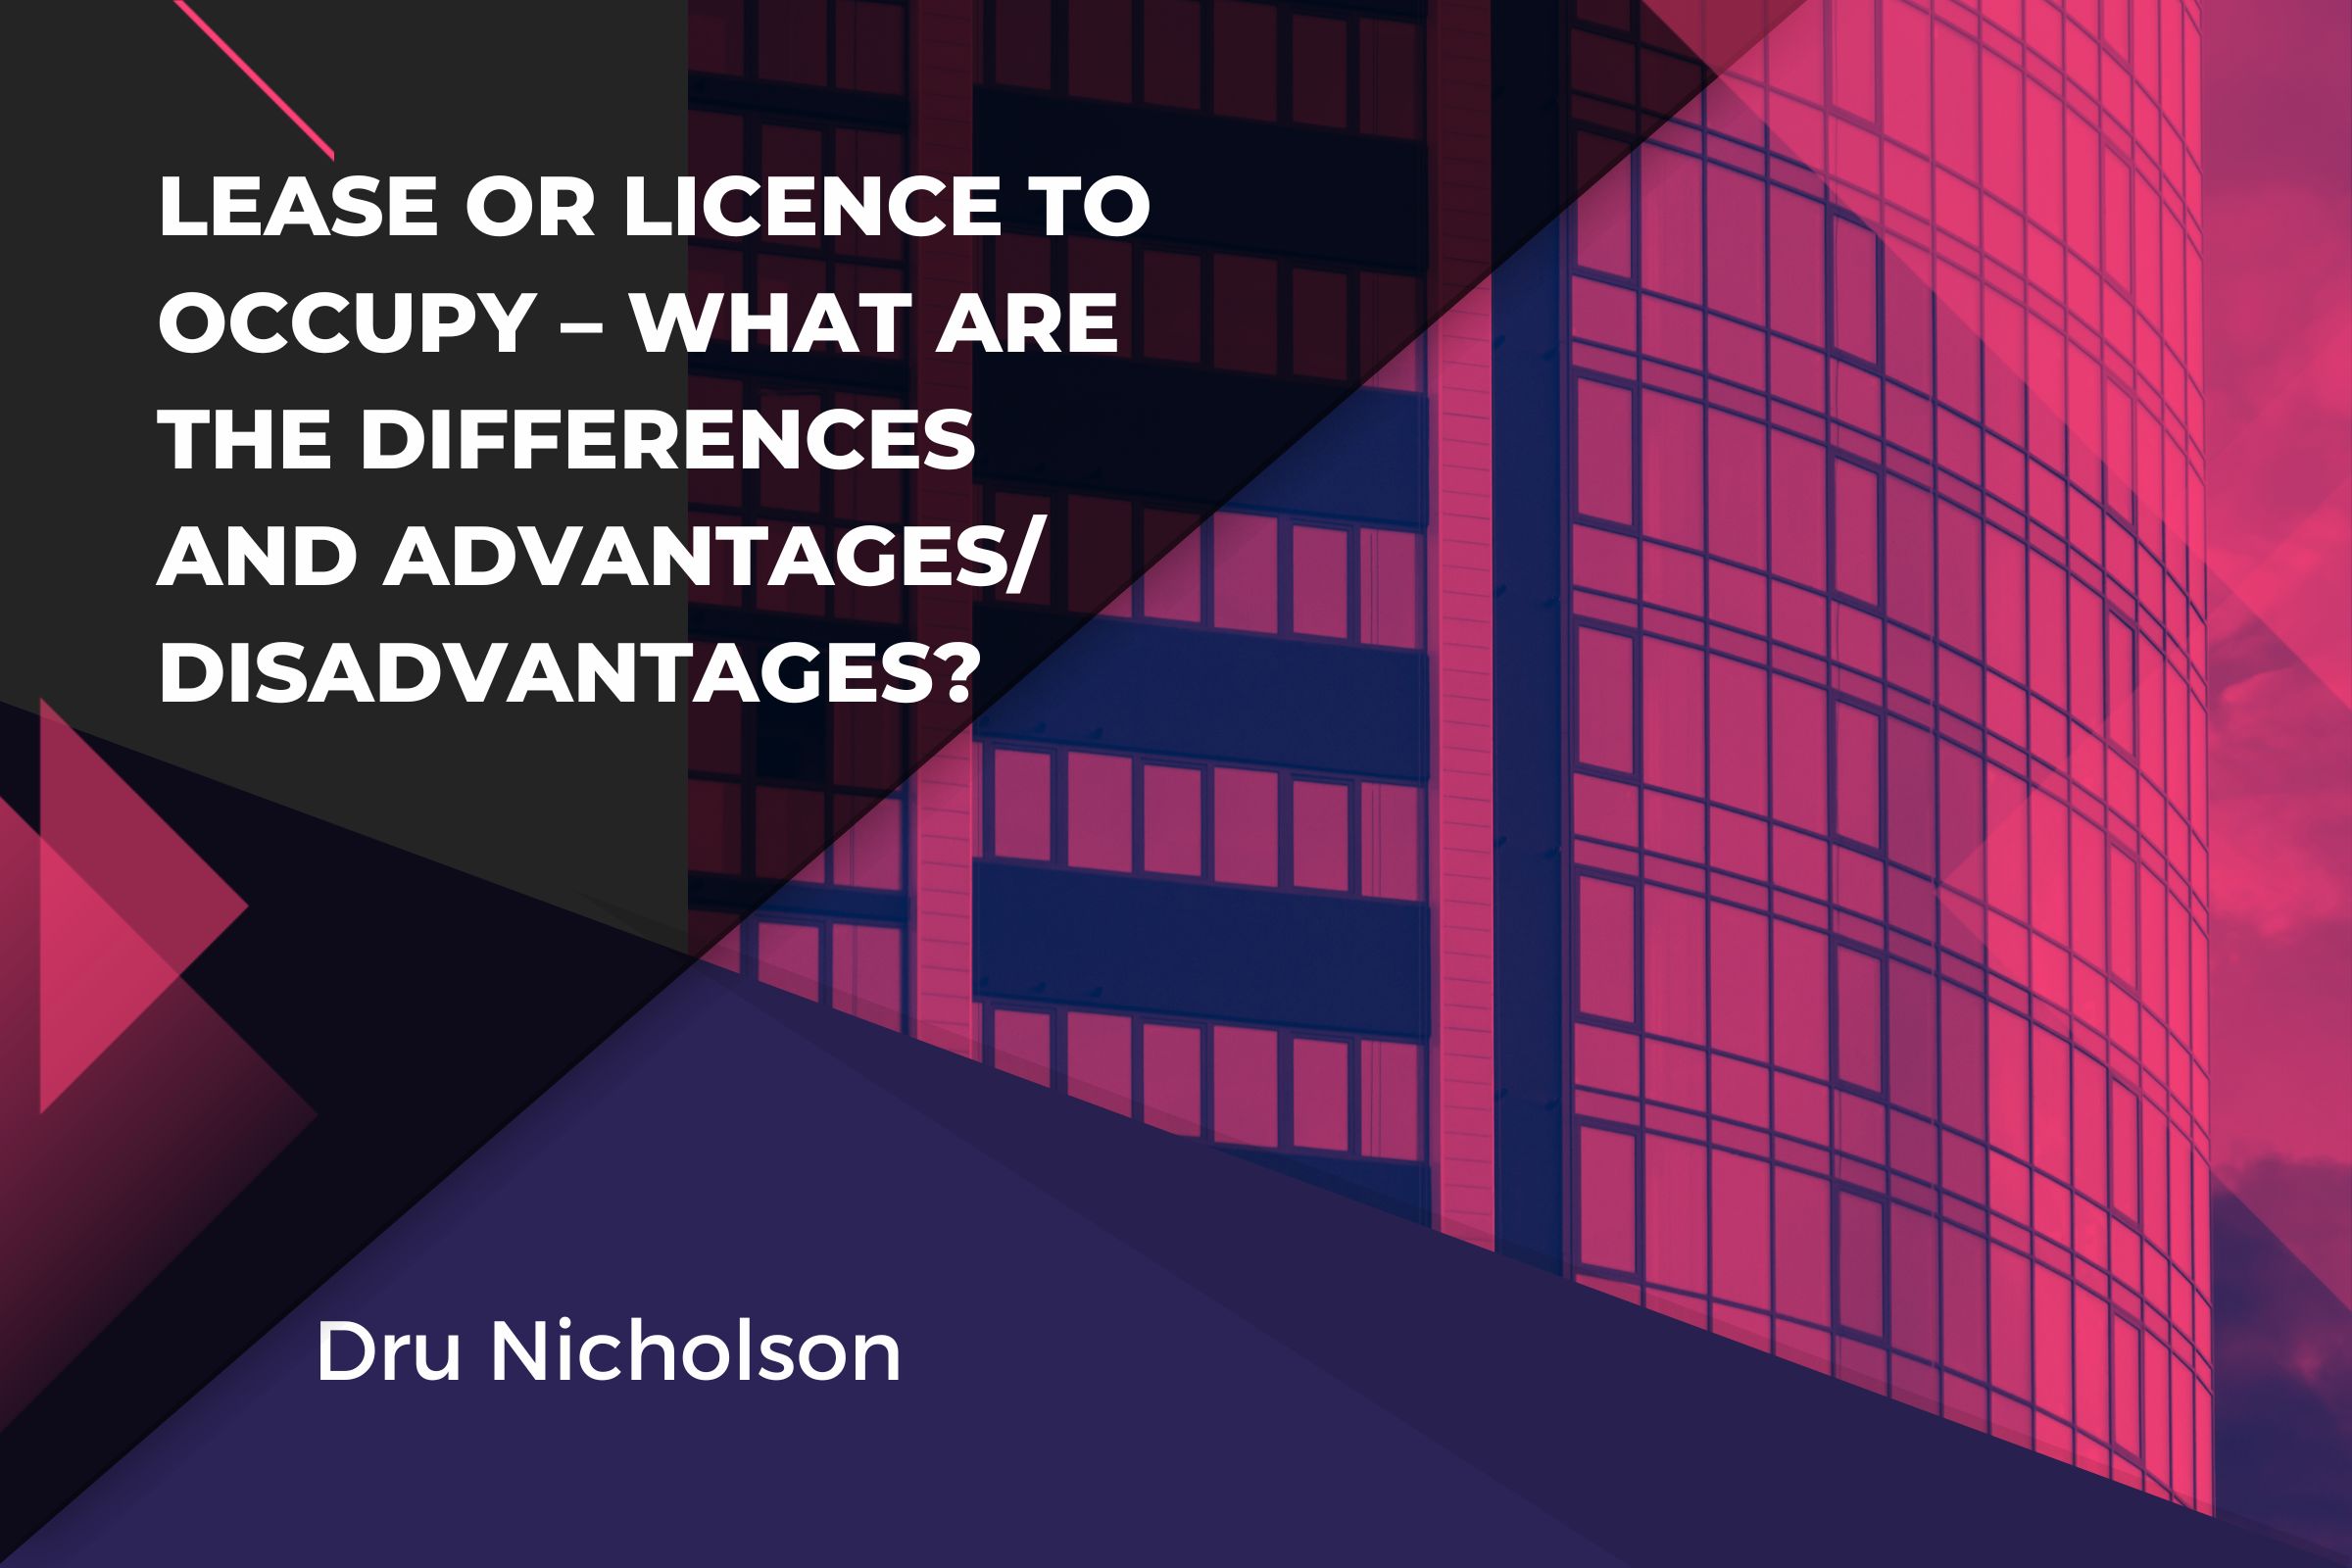 Lease or Licence to Occupy – What are the Differences and Advantages / Disadvantages?